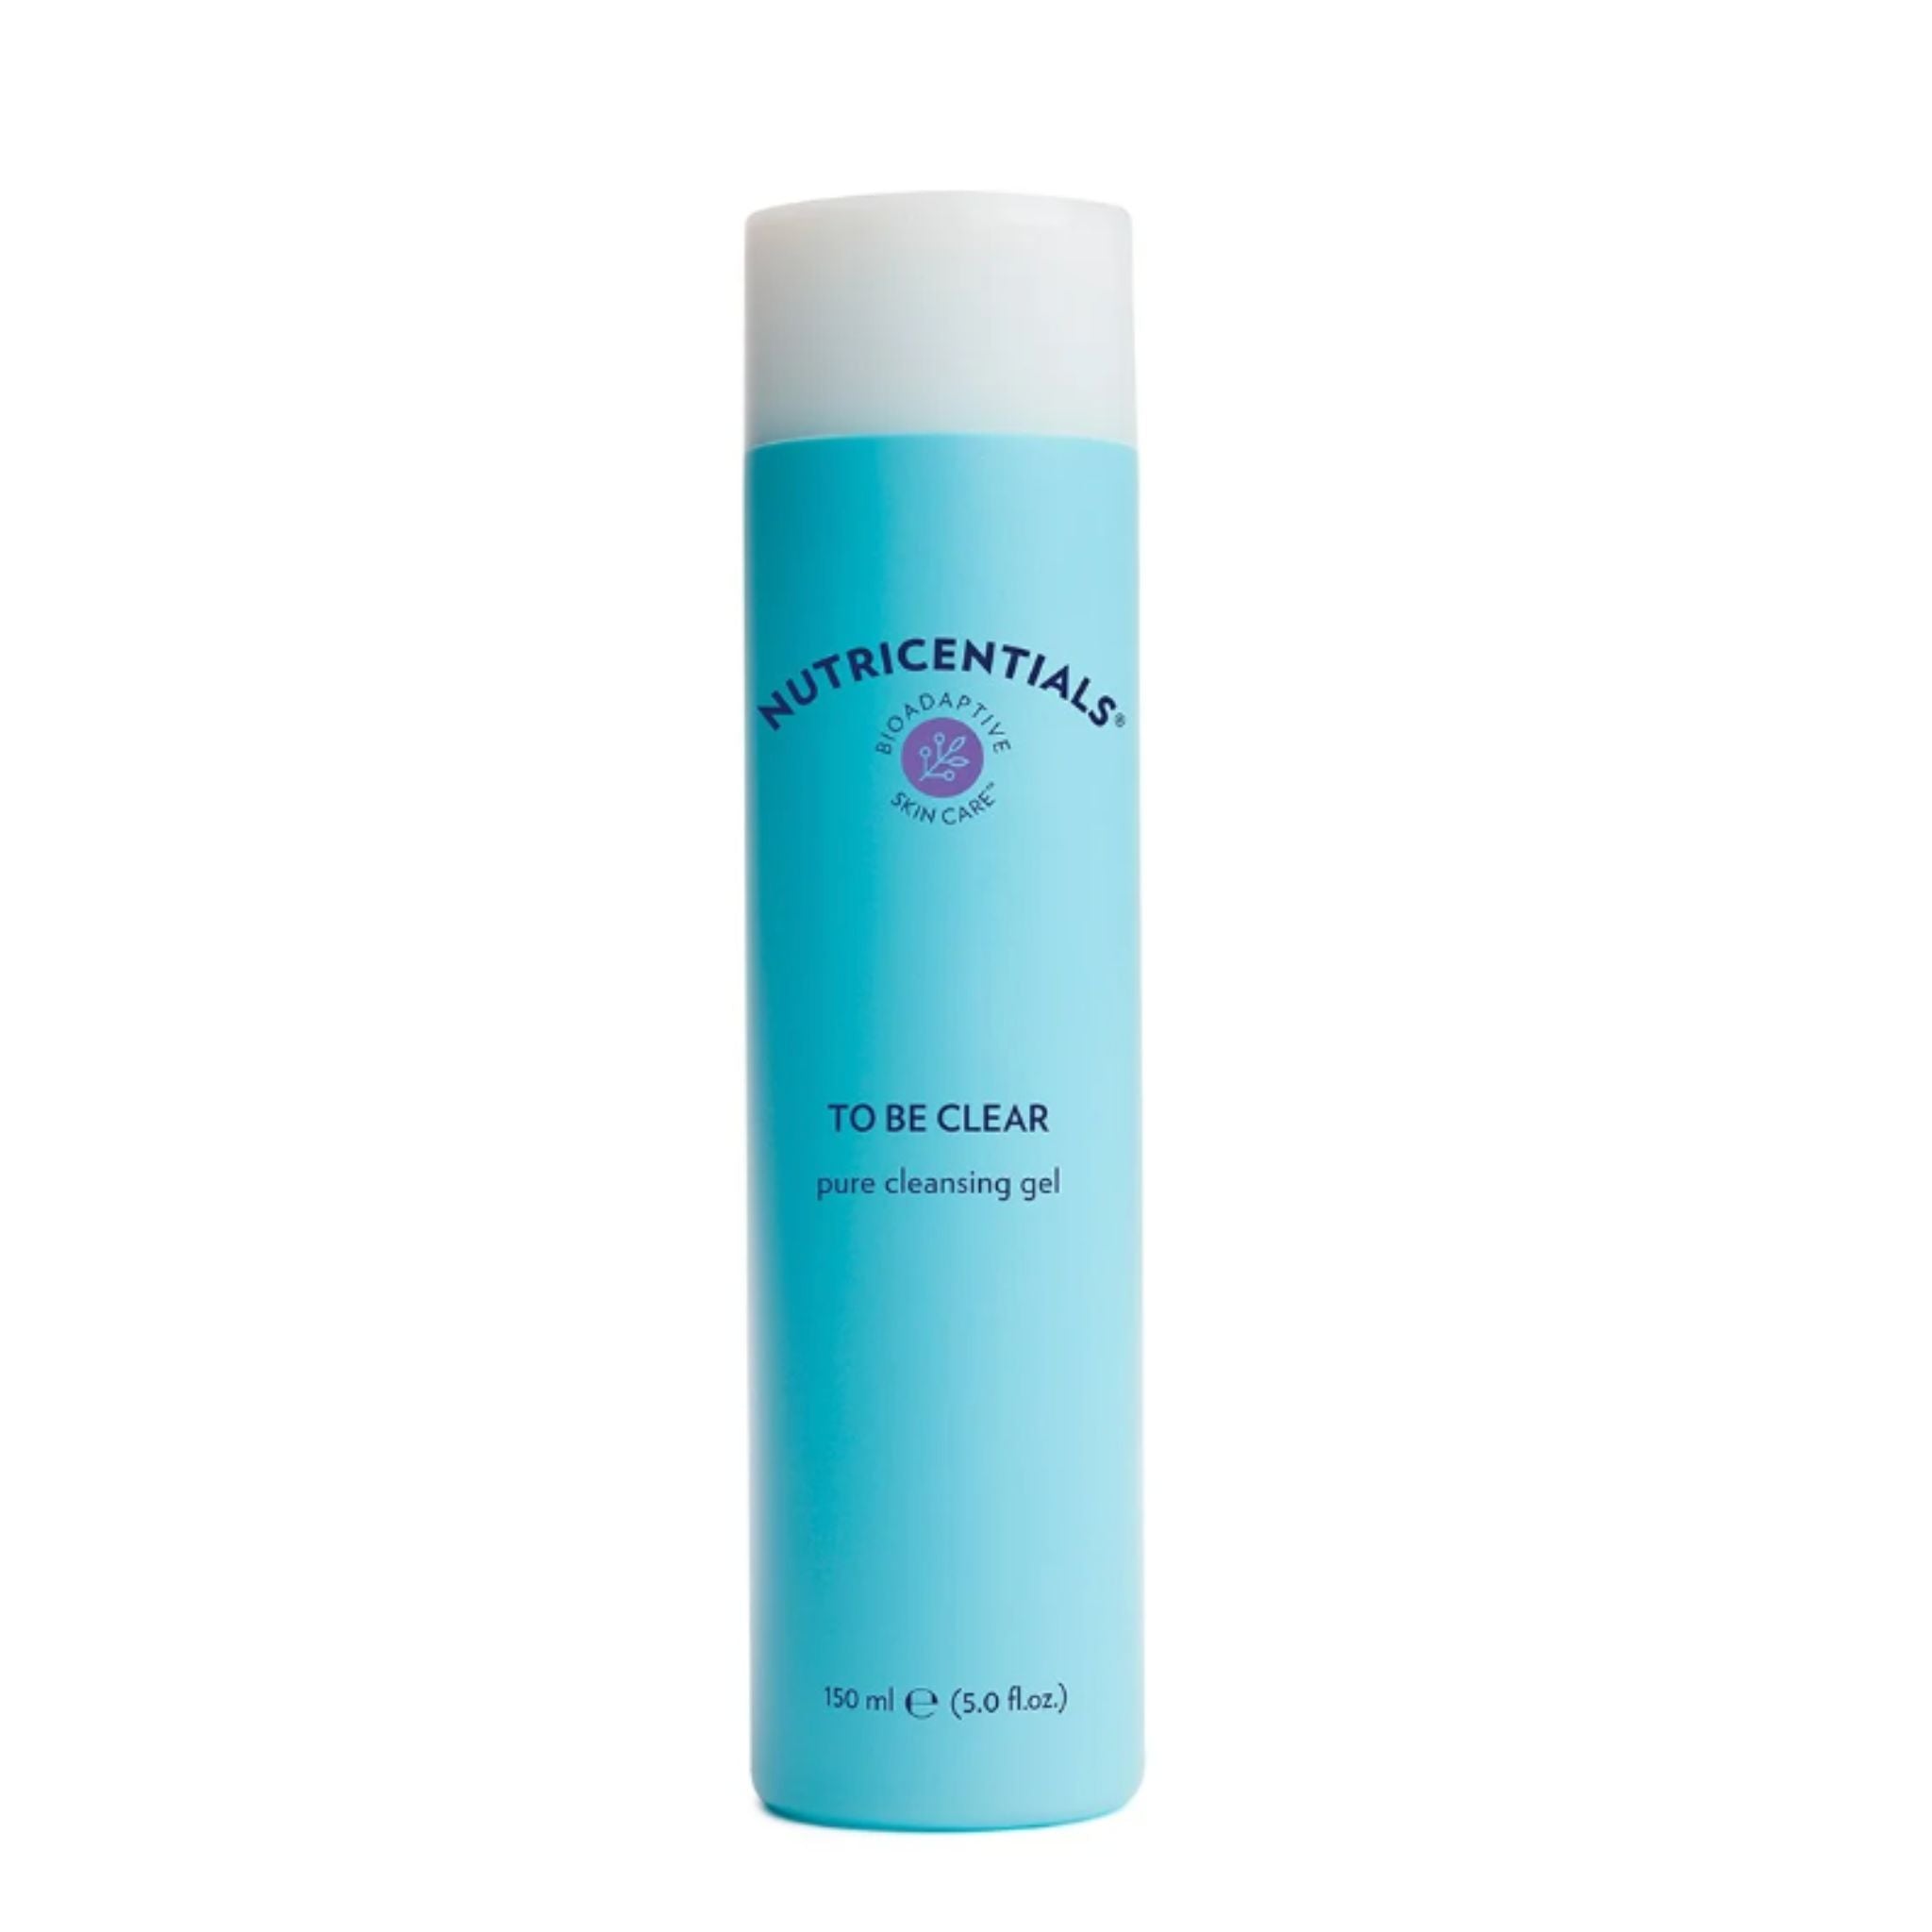 To Be Clear Pure Cleansing Gel: Hydrating Gel to Foam Cleanser with Glycerin, Hyaluronic Acid - thatnatureworld